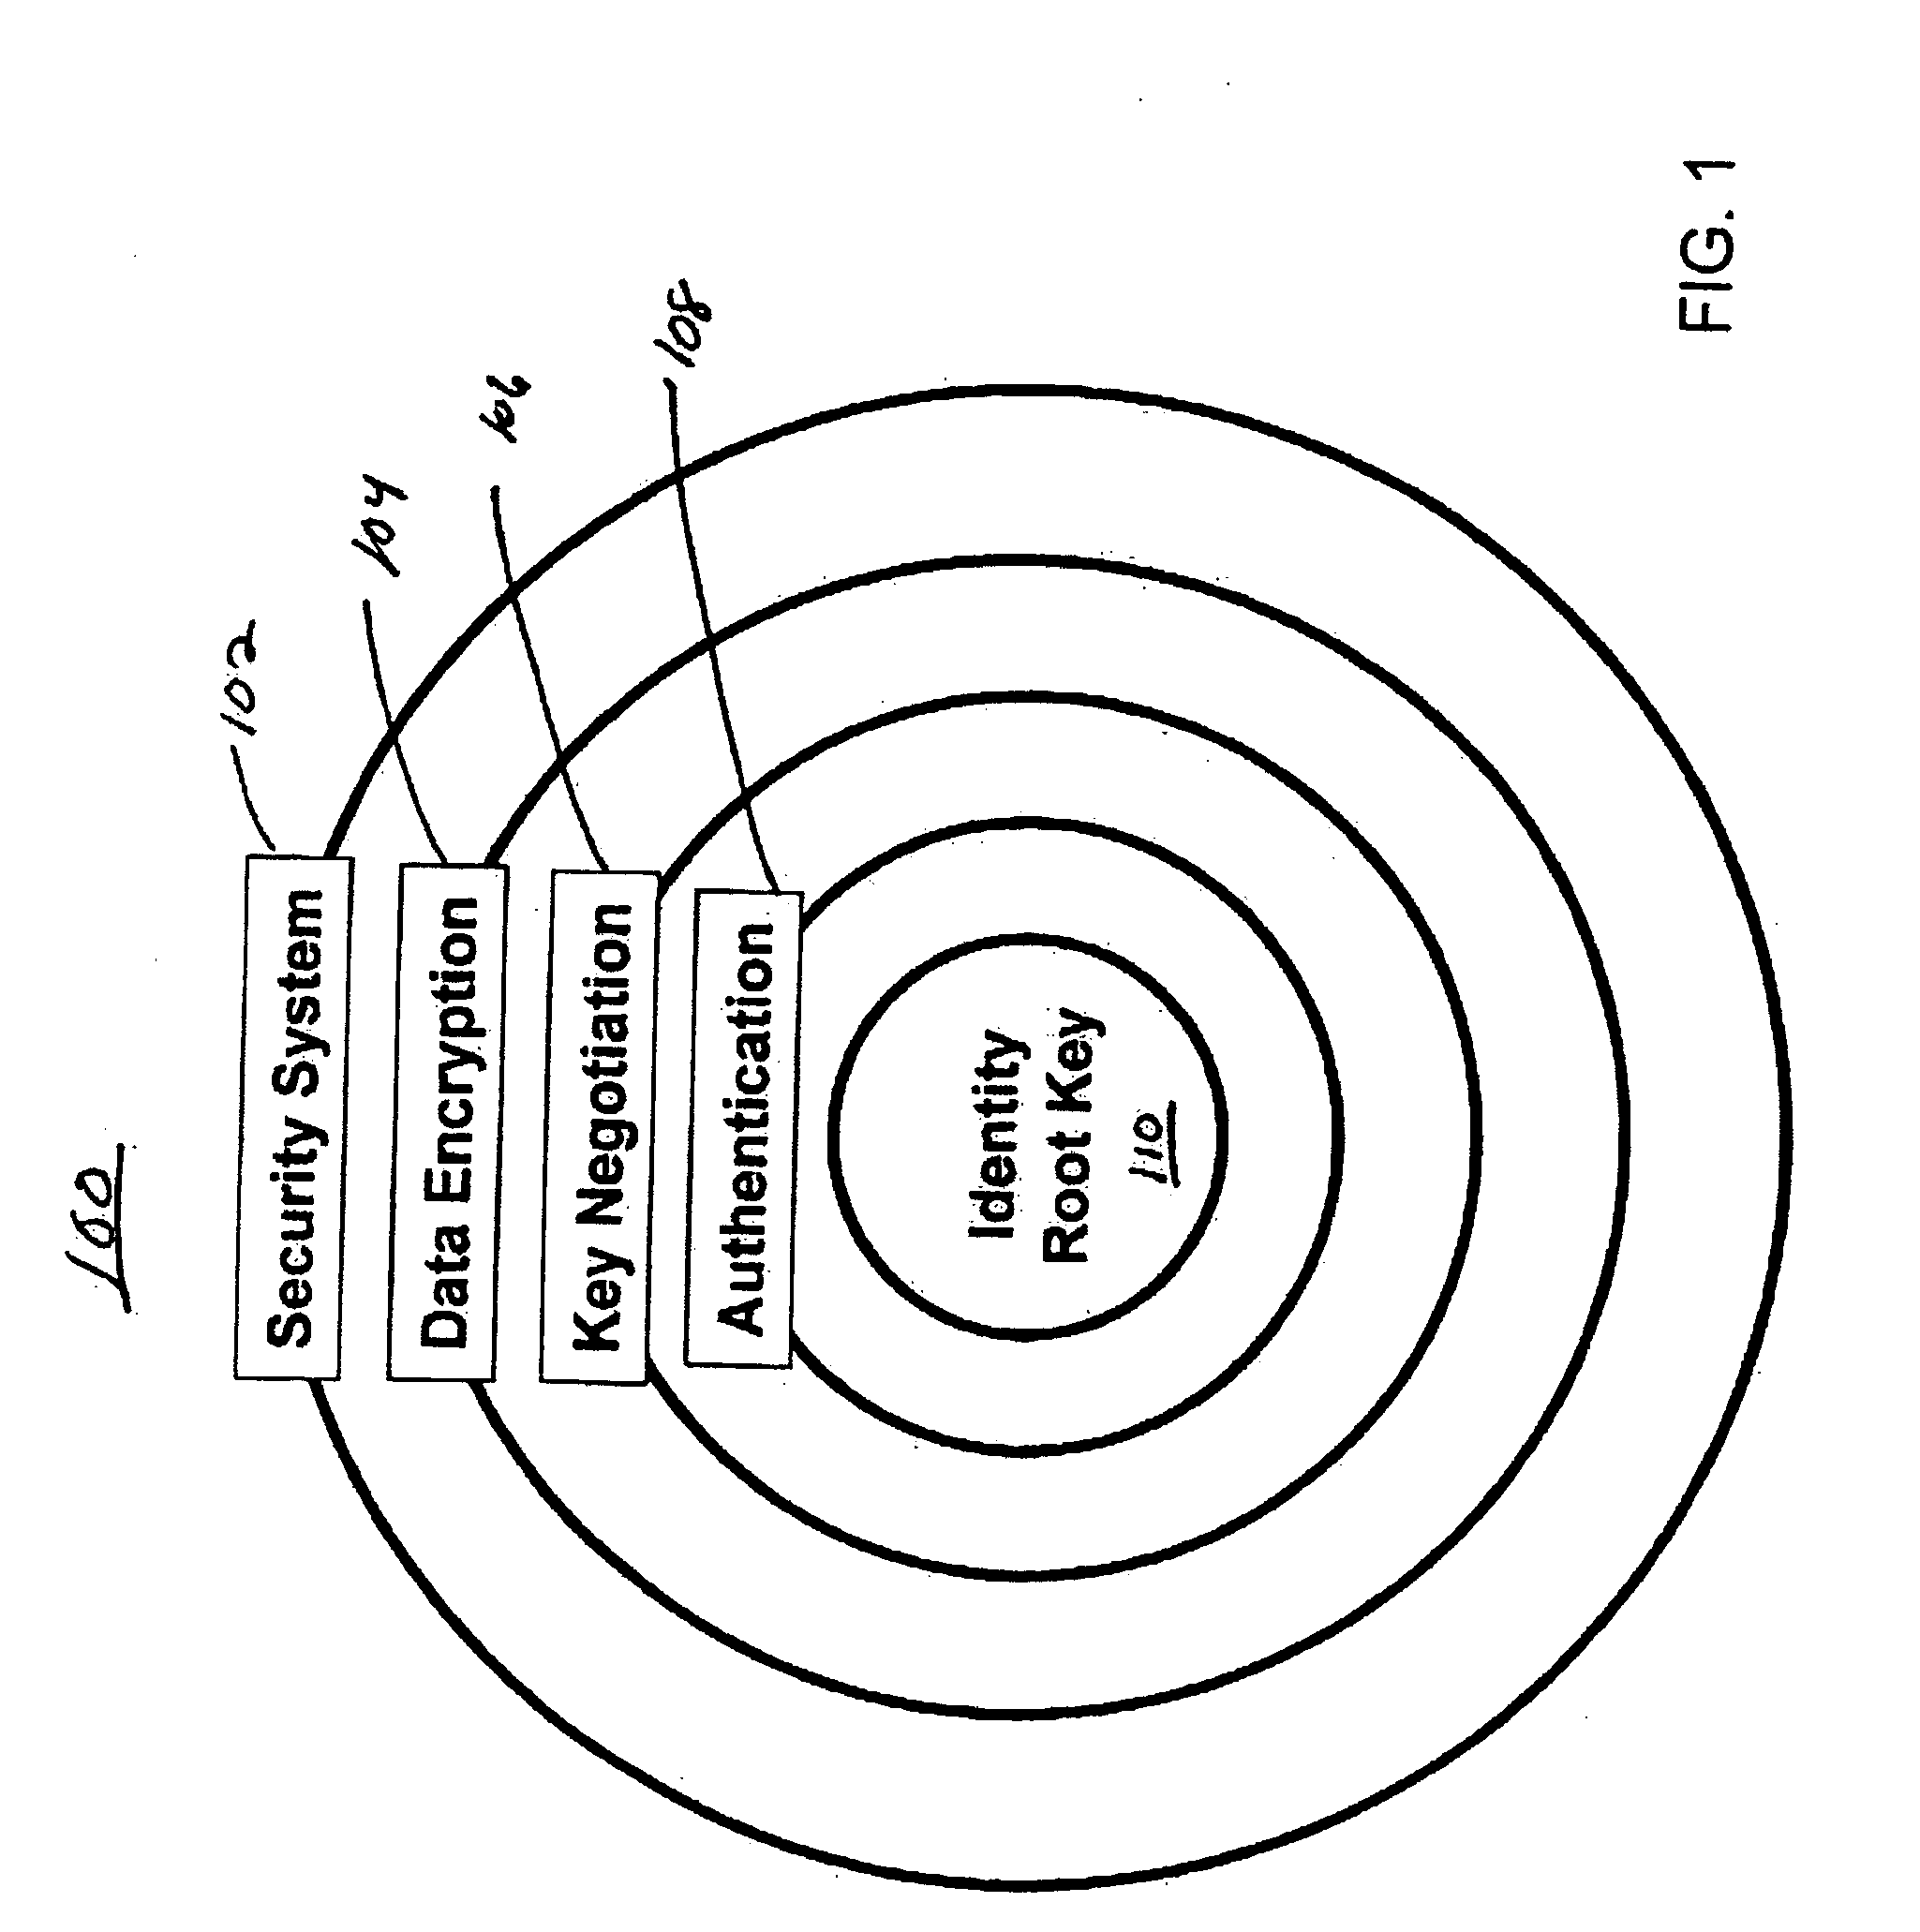 Method and system for policy based authentication